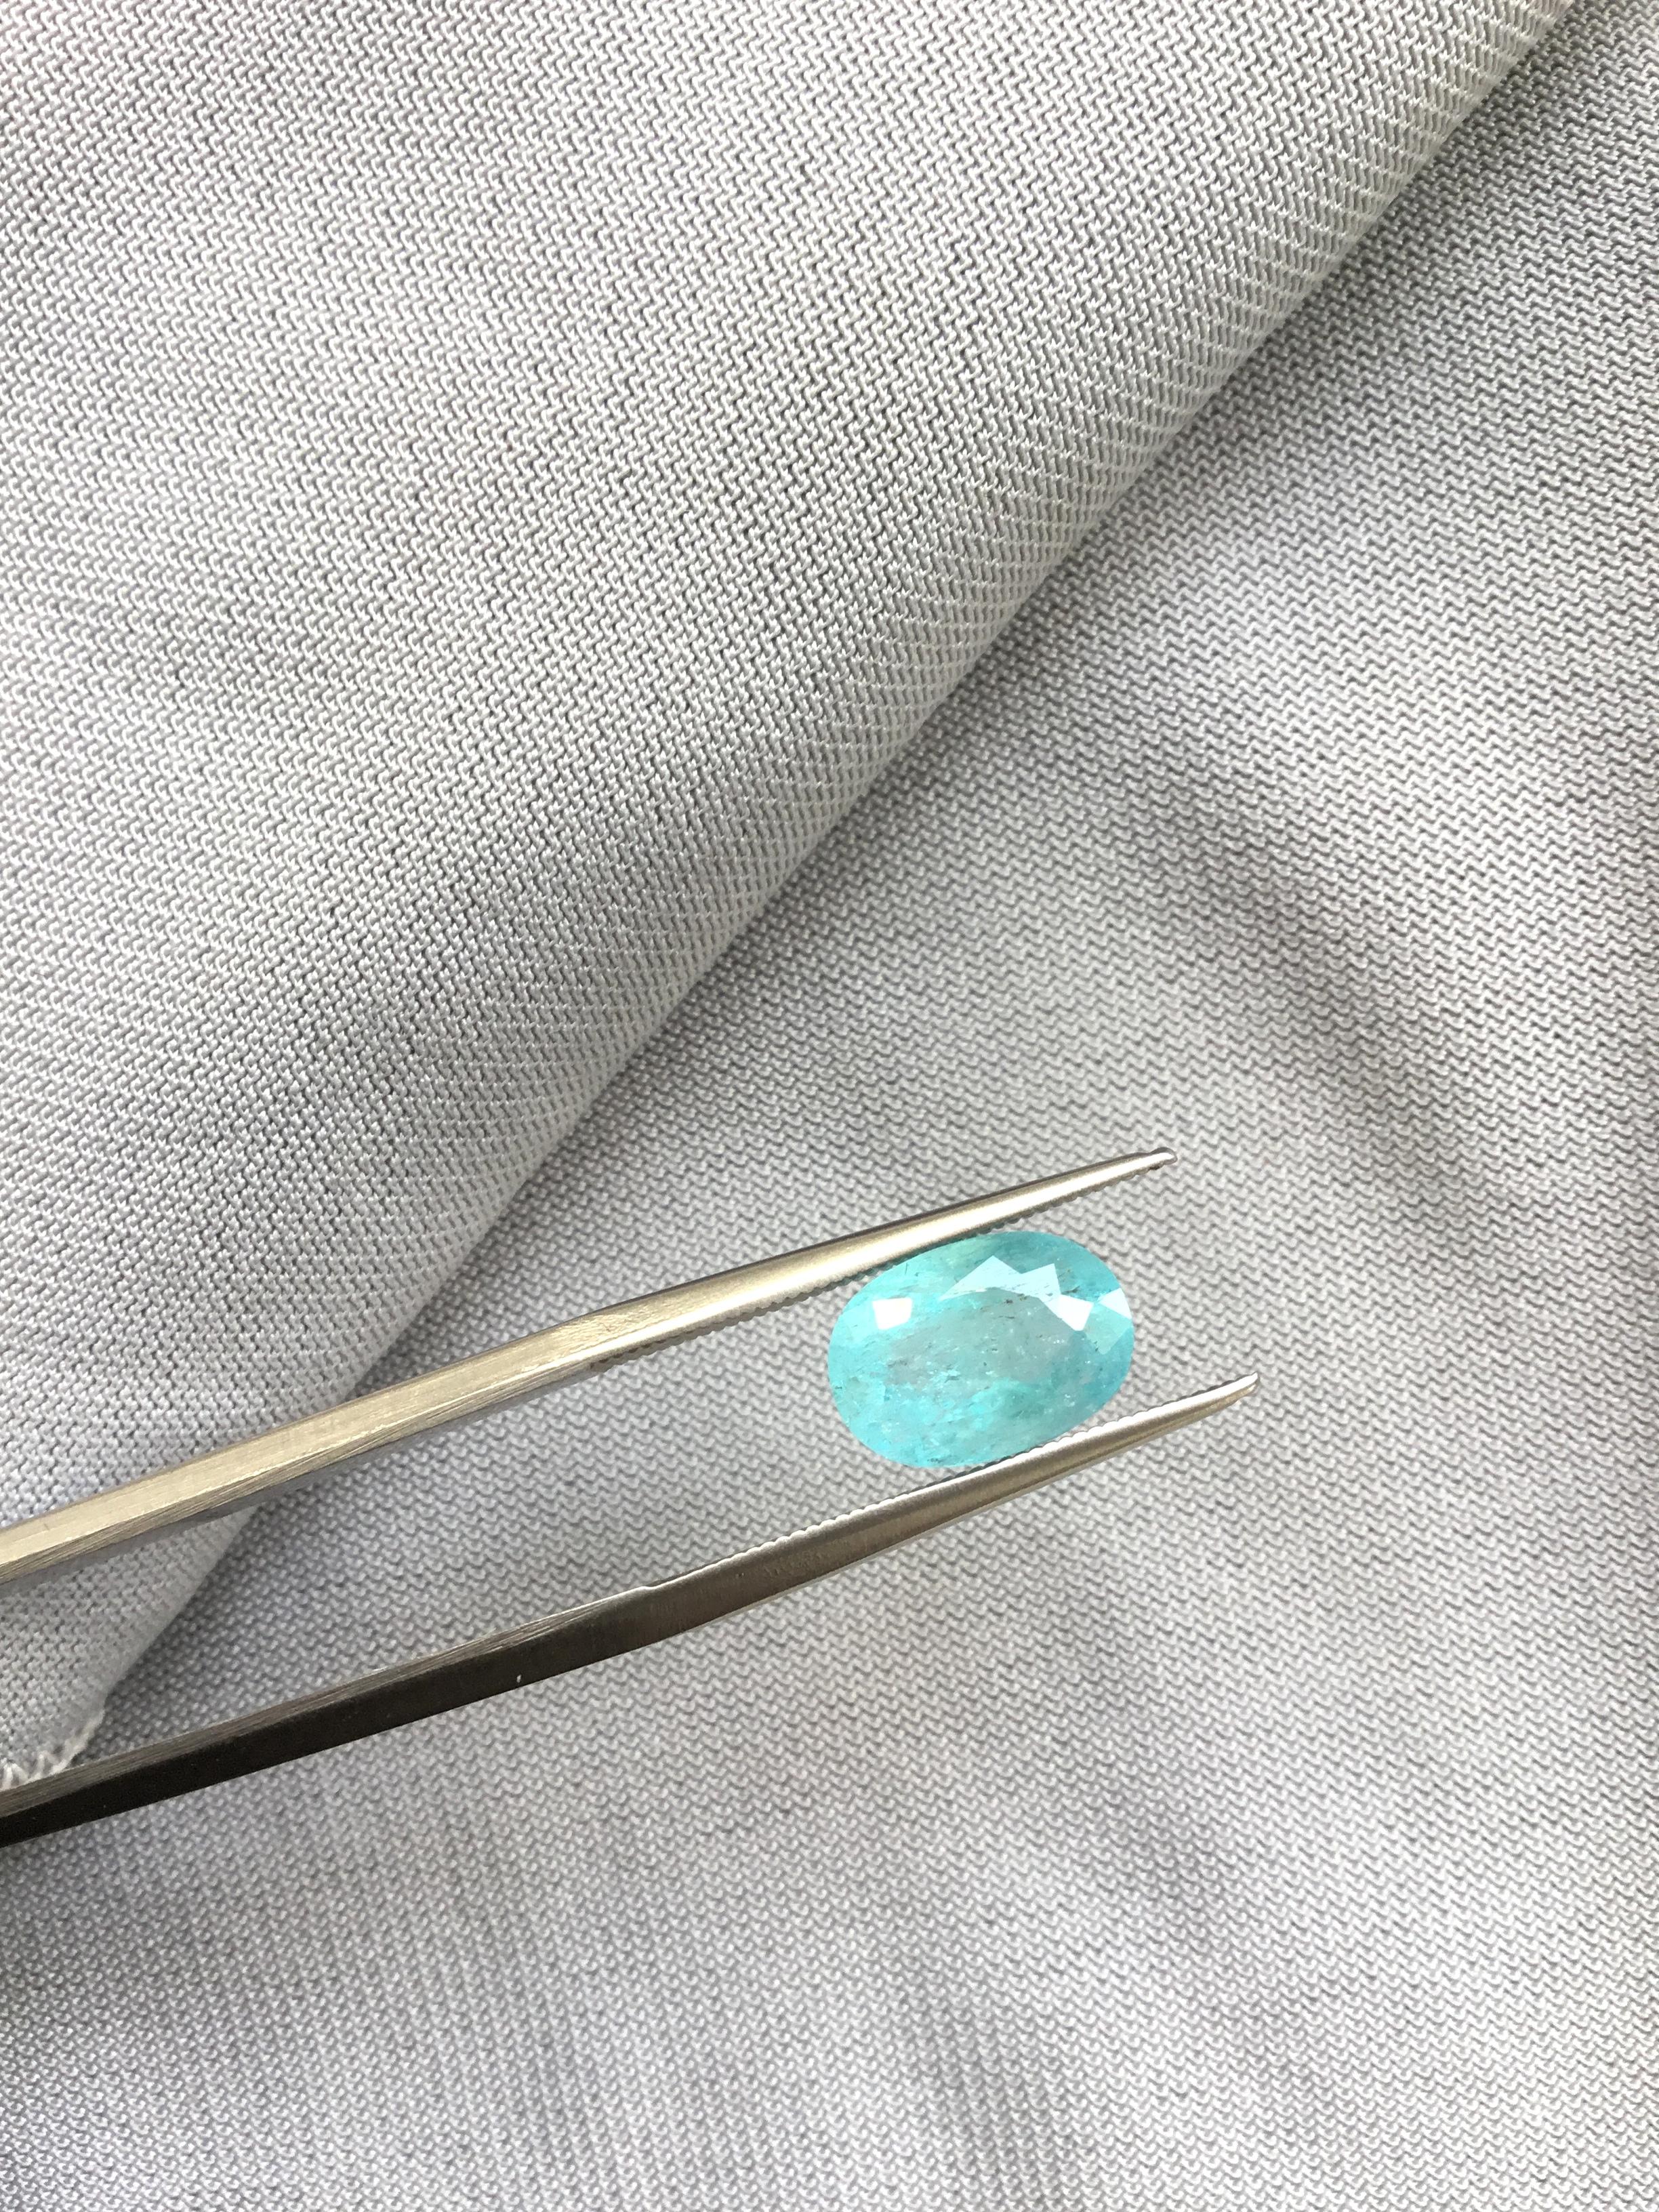 Exceptional 2.71 Carats Paraiba Tourmaline Oval Cut Stone for Fine Jewelry